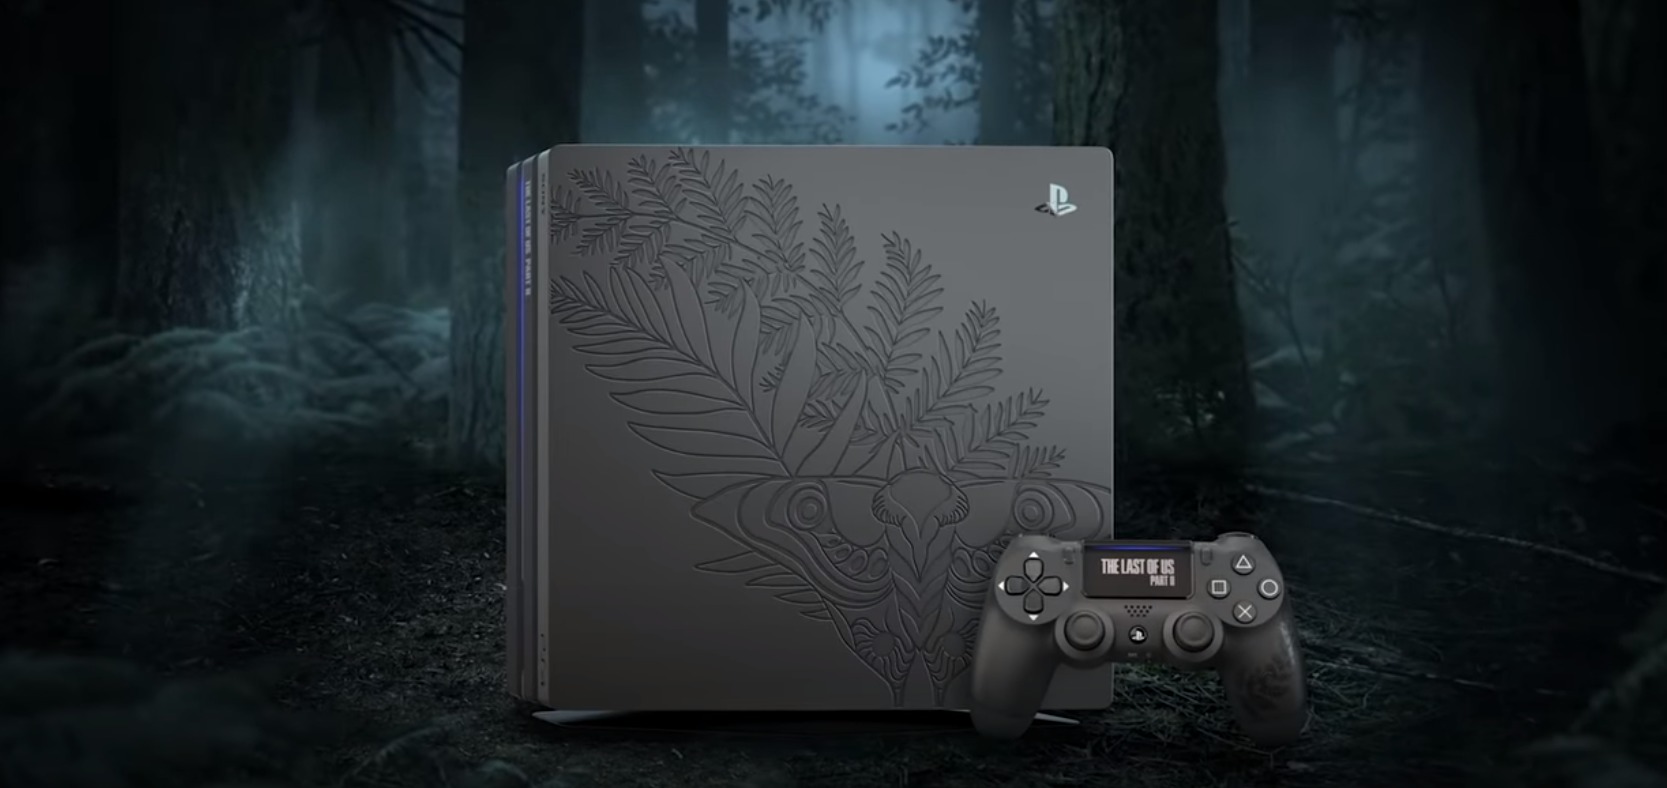 The Last Of Us Part 2 Themed PlayStation 4 Pro Is Now Available For Pre-Order Ahead Of Its June 19 Release